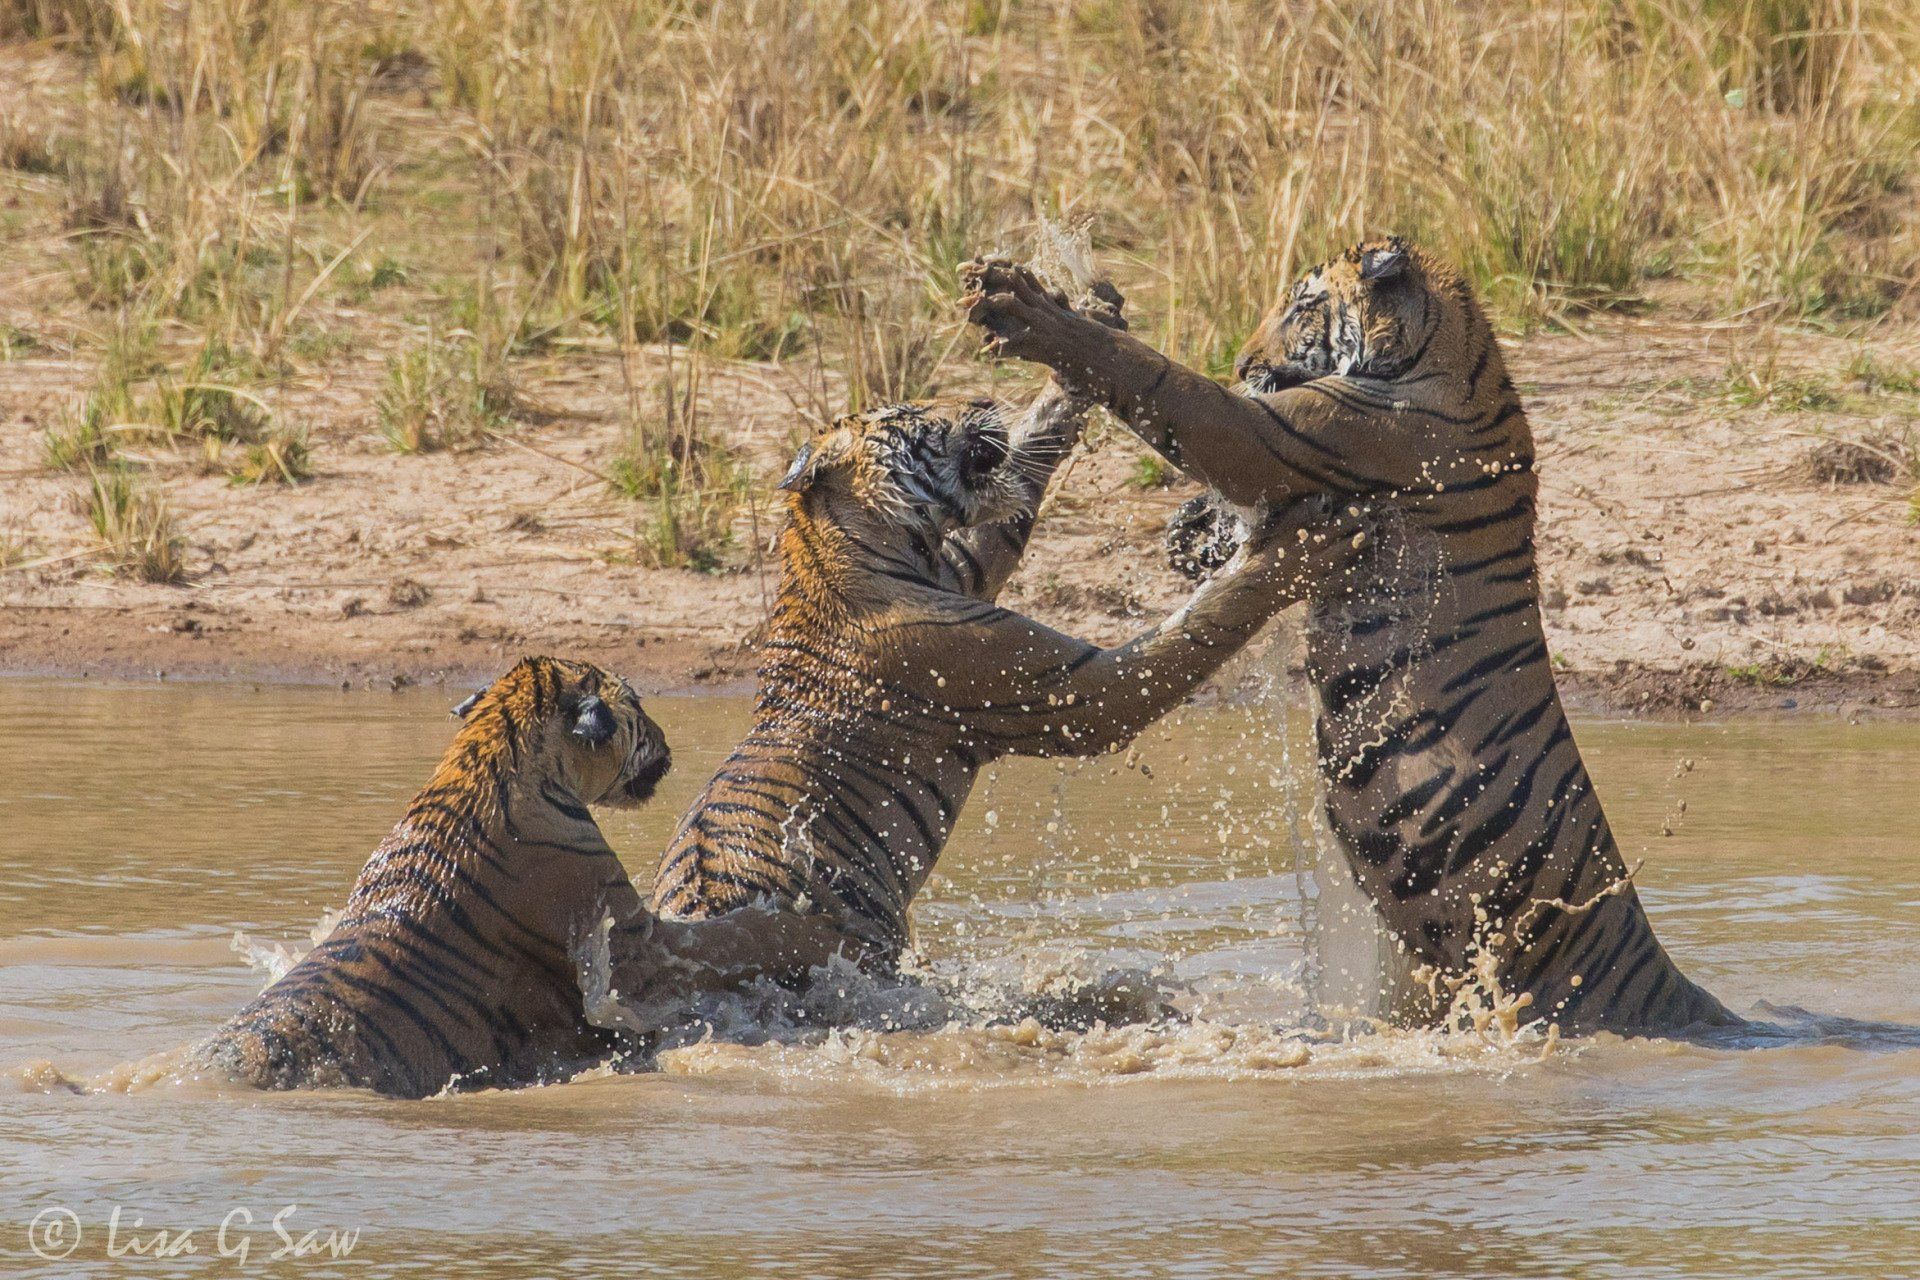 Three young tigers play fighting in water